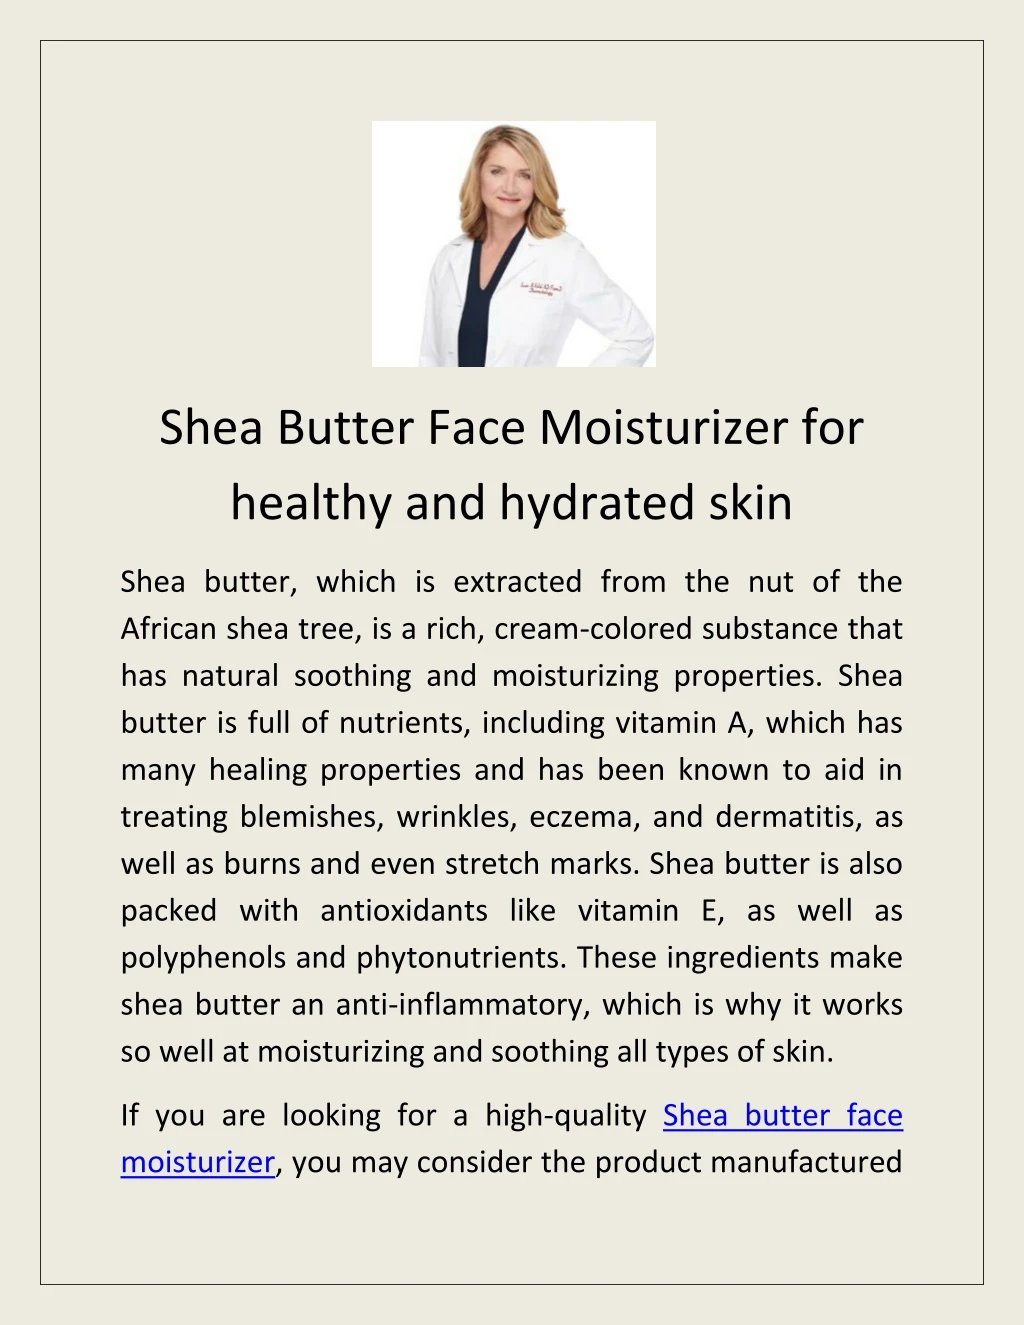 shea butter face moisturizer for healthy